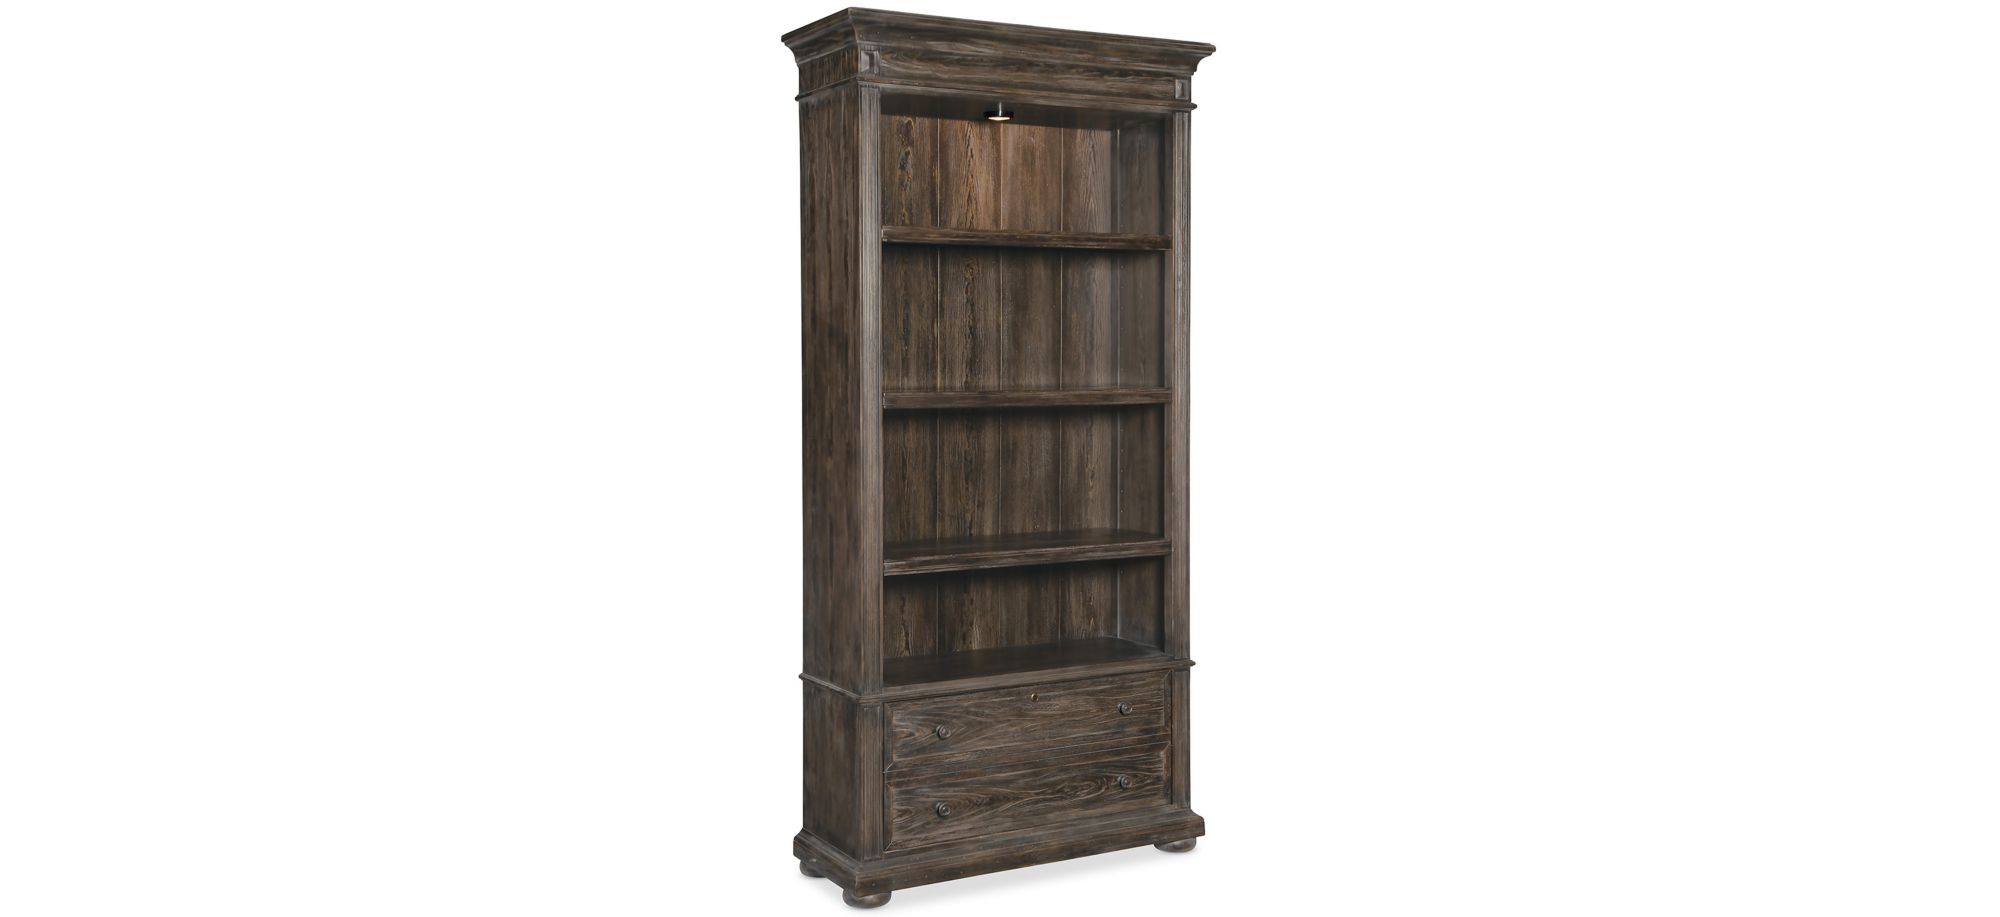 Traditions Bookcase in Brown by Hooker Furniture